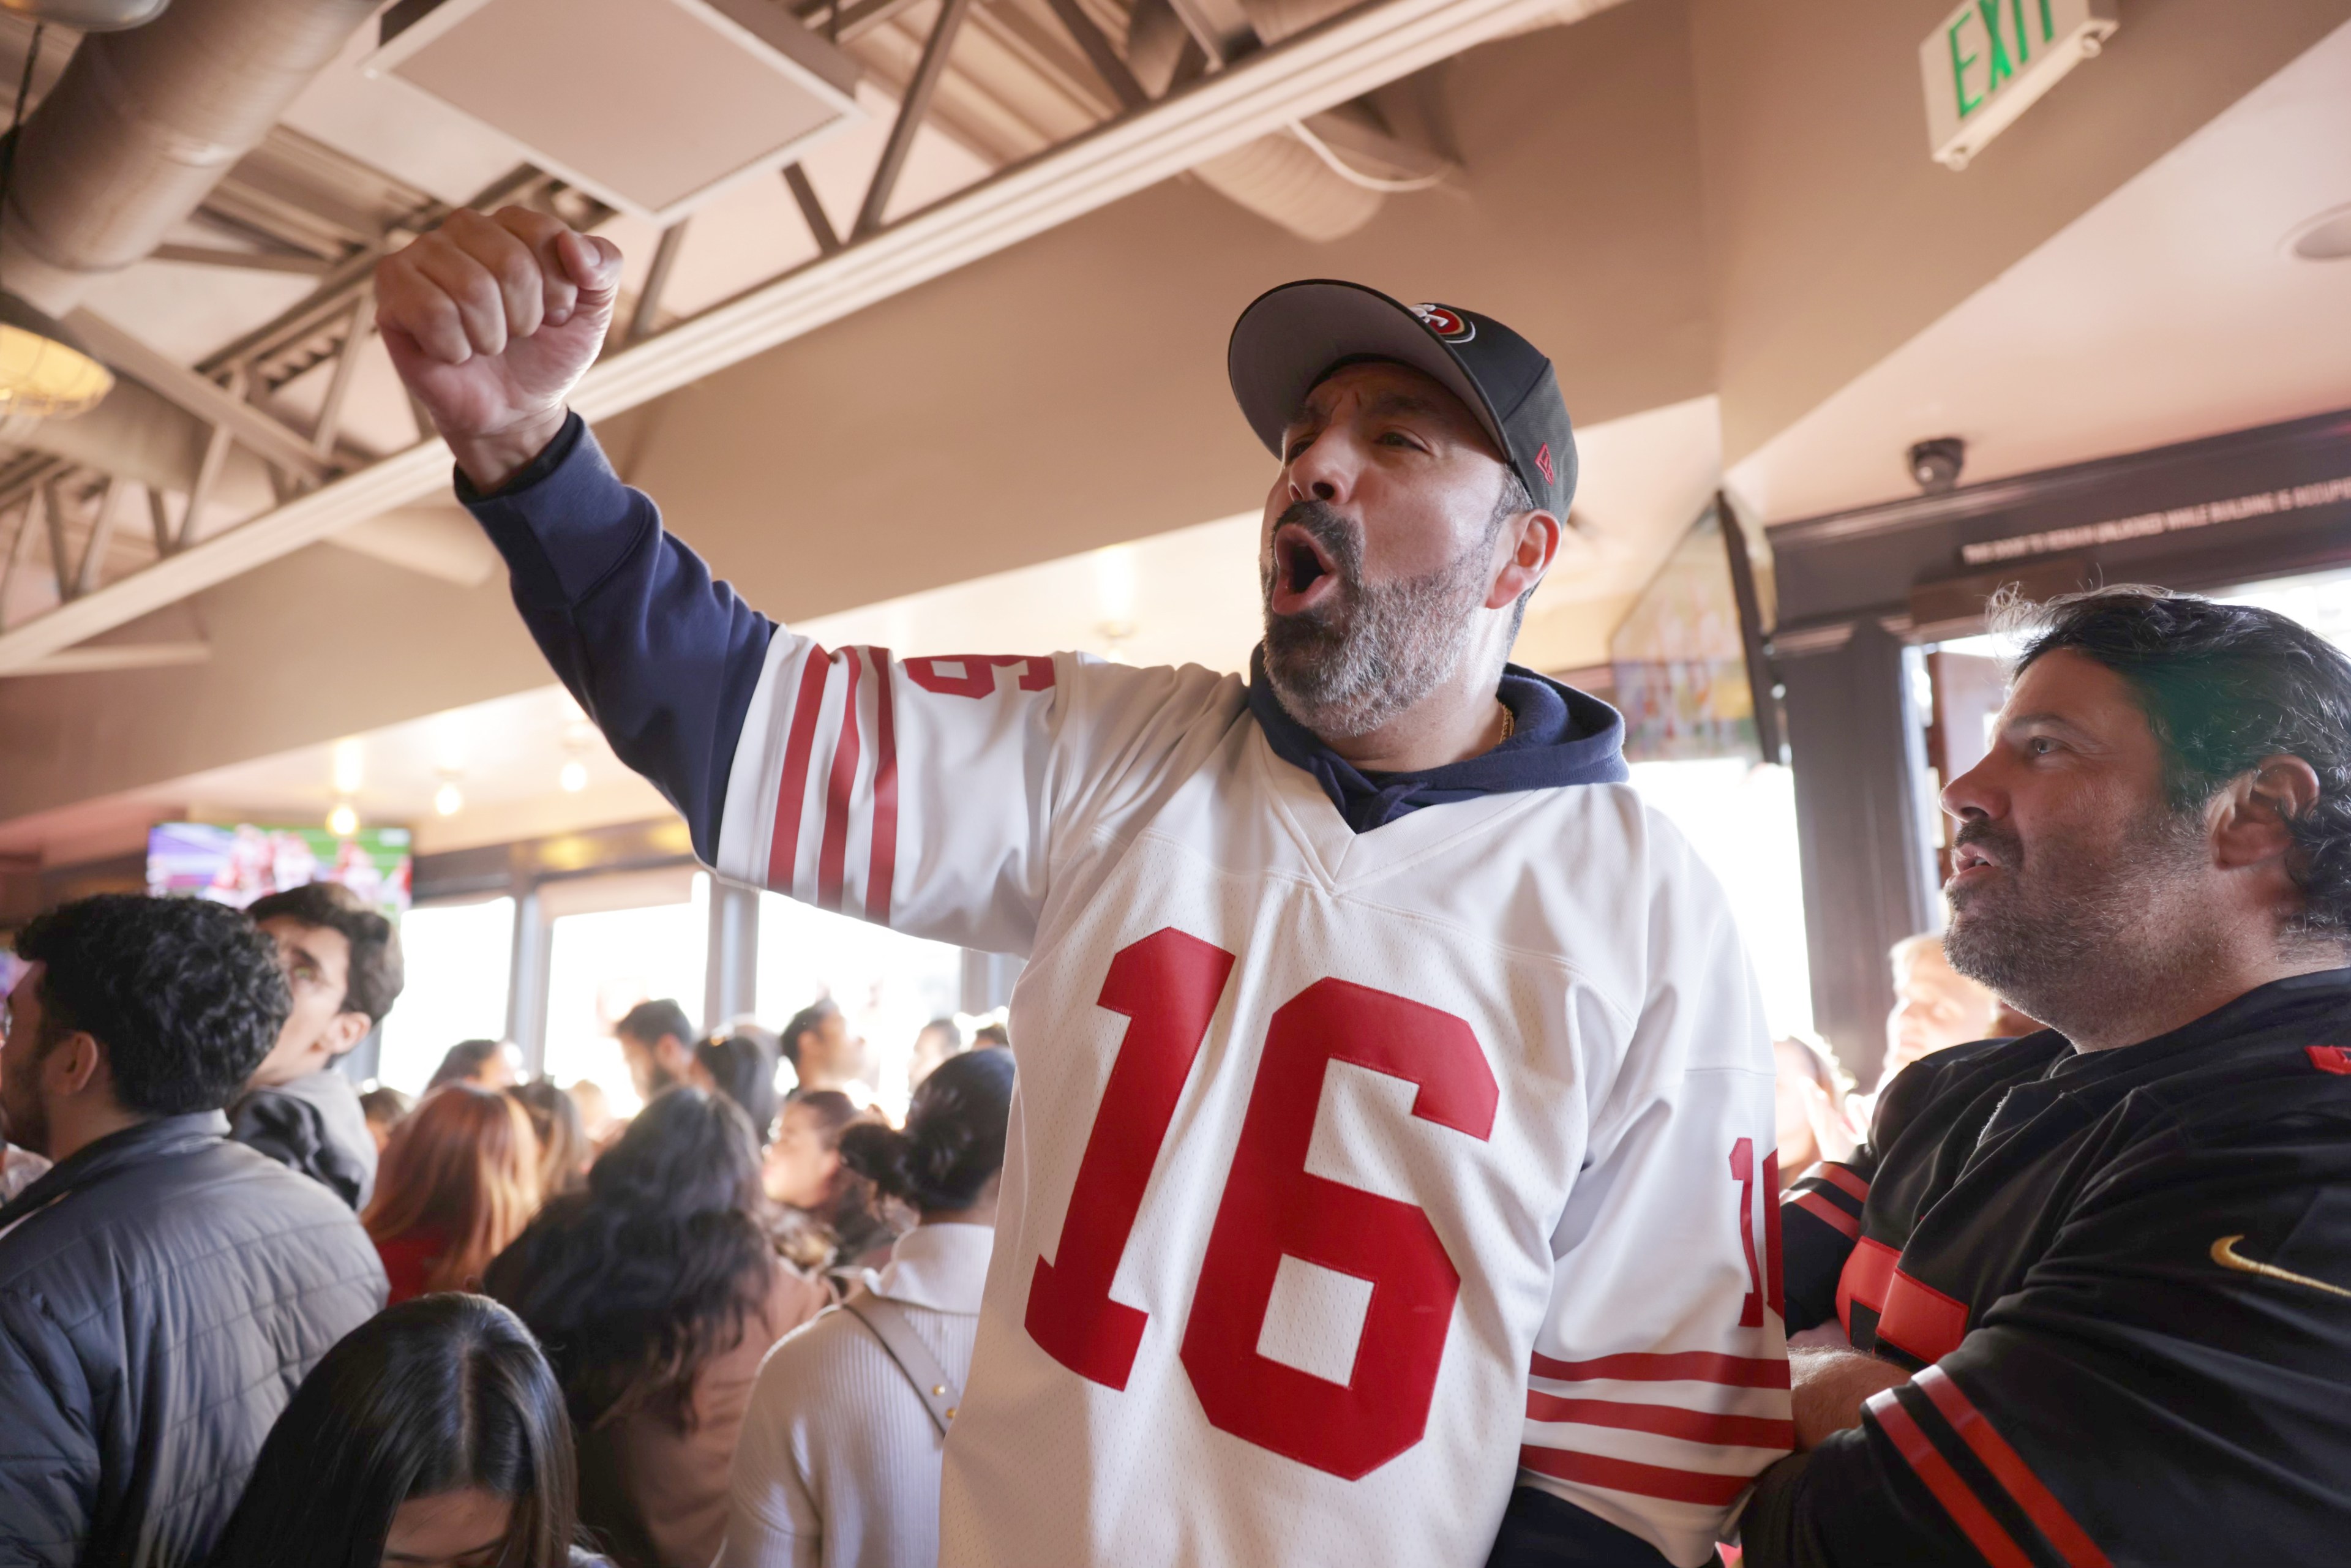 Man in white 49ers jersey raises fist and cheers